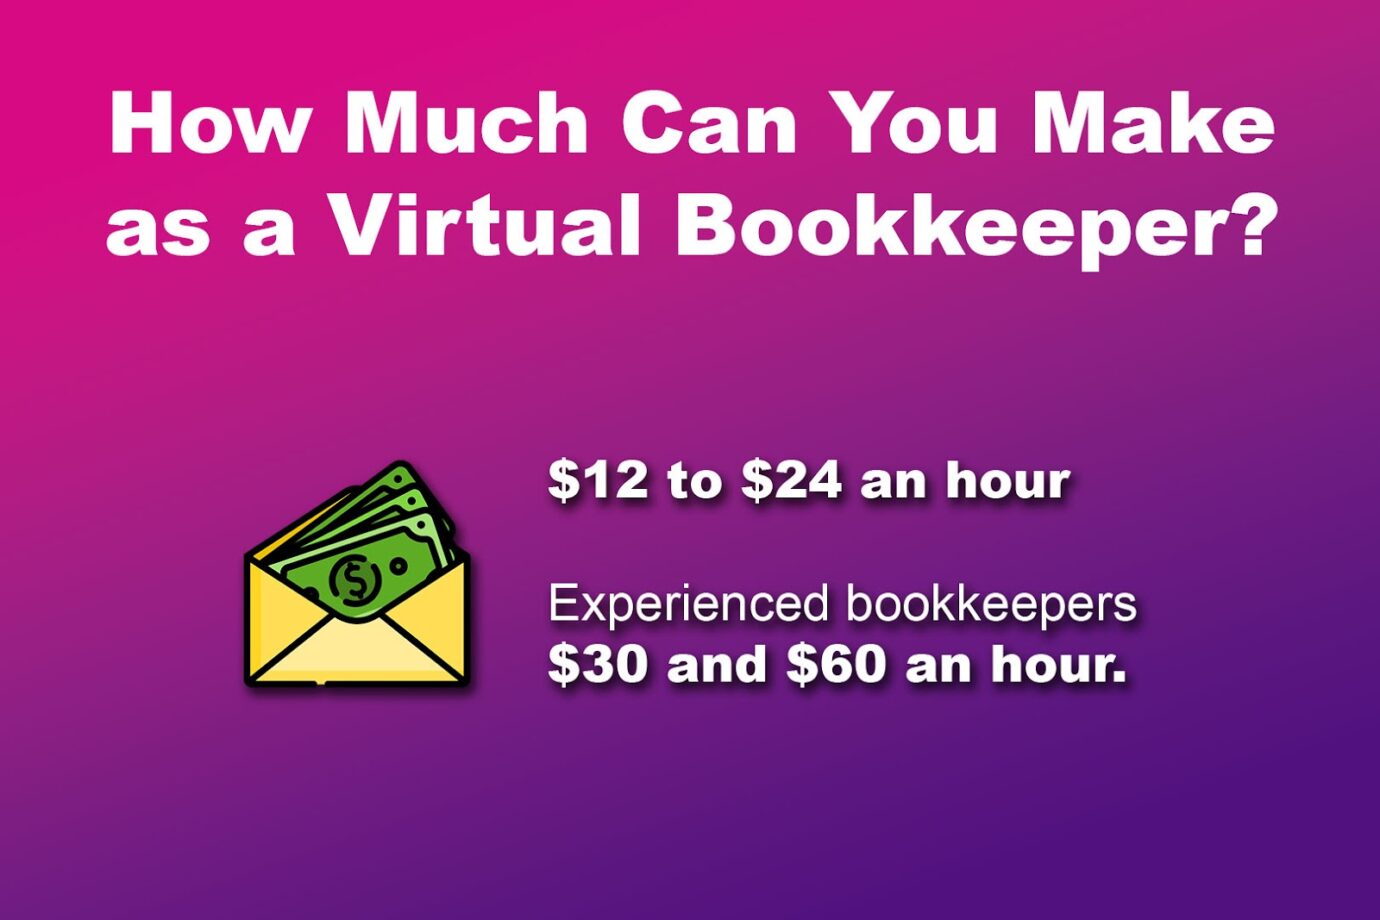 How Much Virtual Bookkeepers Make